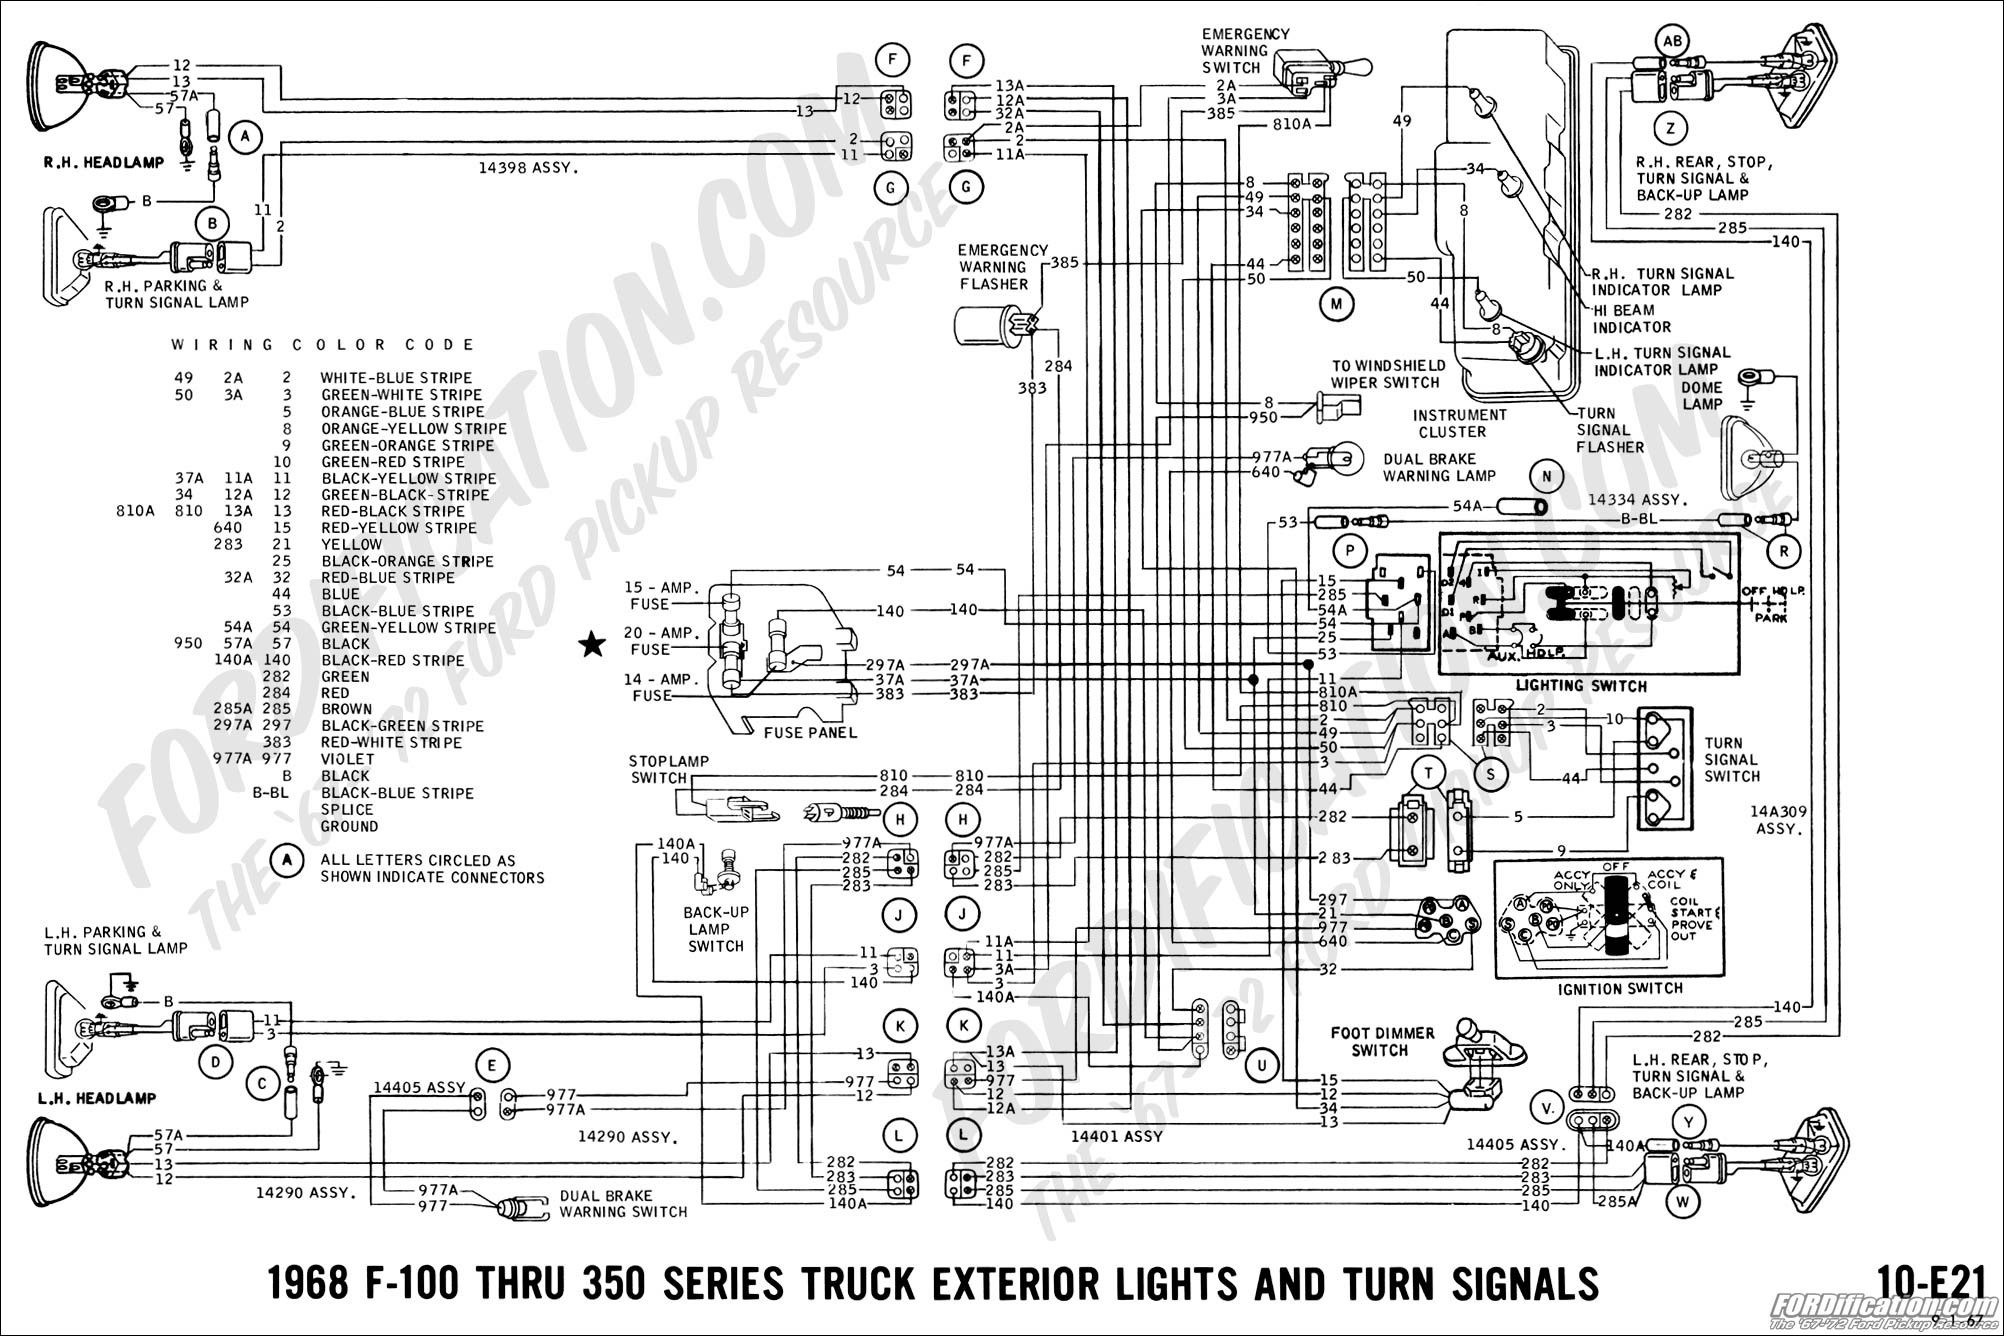 Turn Signal Wiring Diagram Chevy Truck Turn Signal Wire Diagram ford Truck Technical Drawings and Of Turn Signal Wiring Diagram Chevy Truck